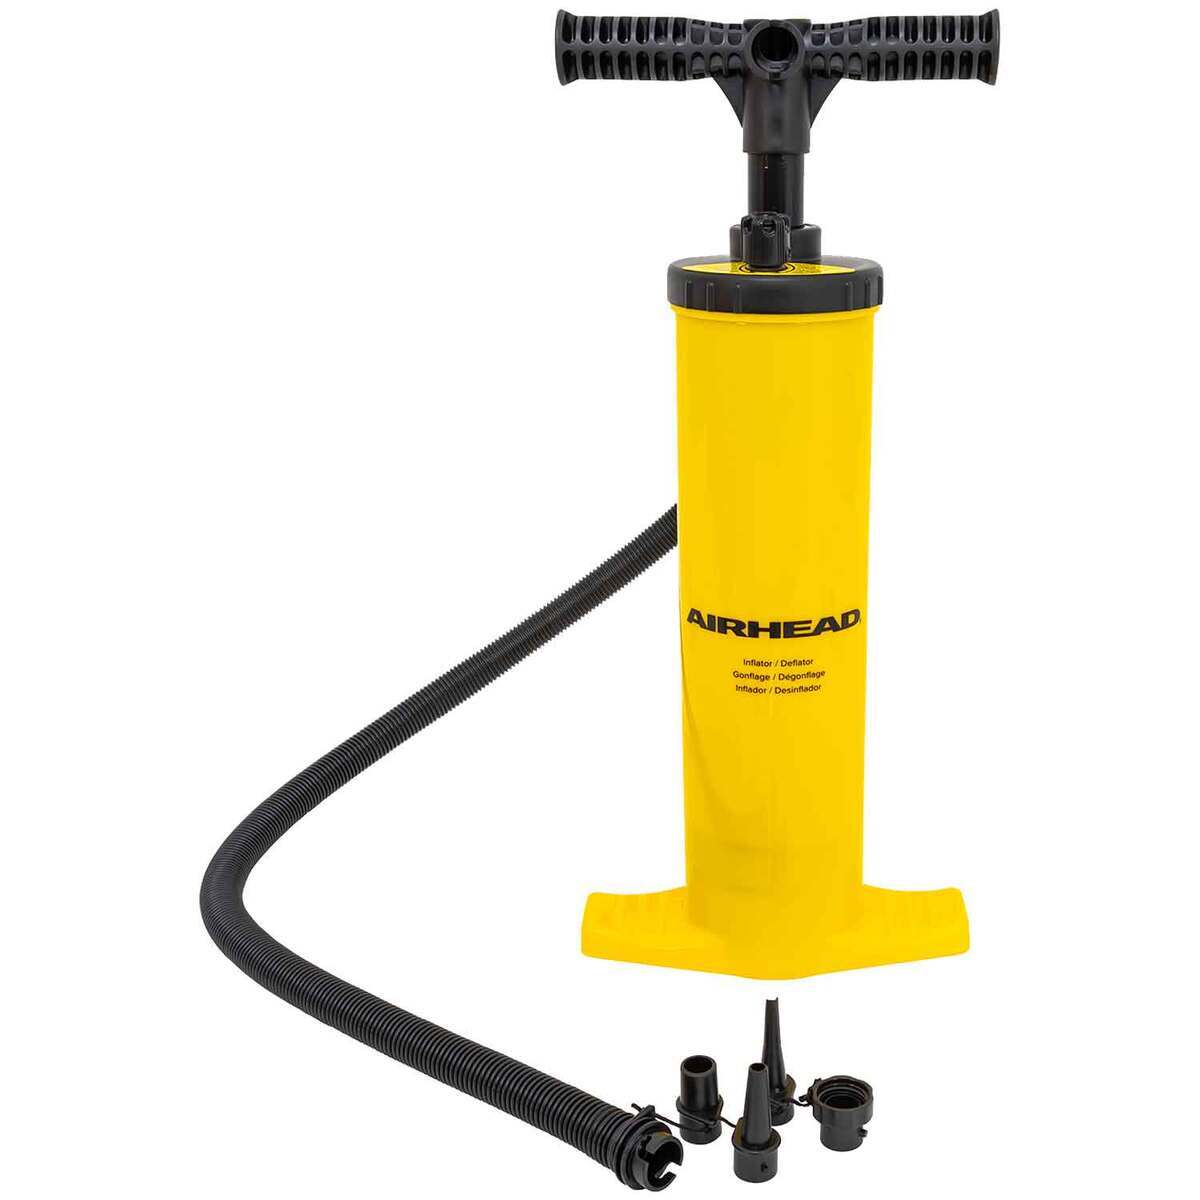 Airhead Double Action Hand Pump - AHP-1